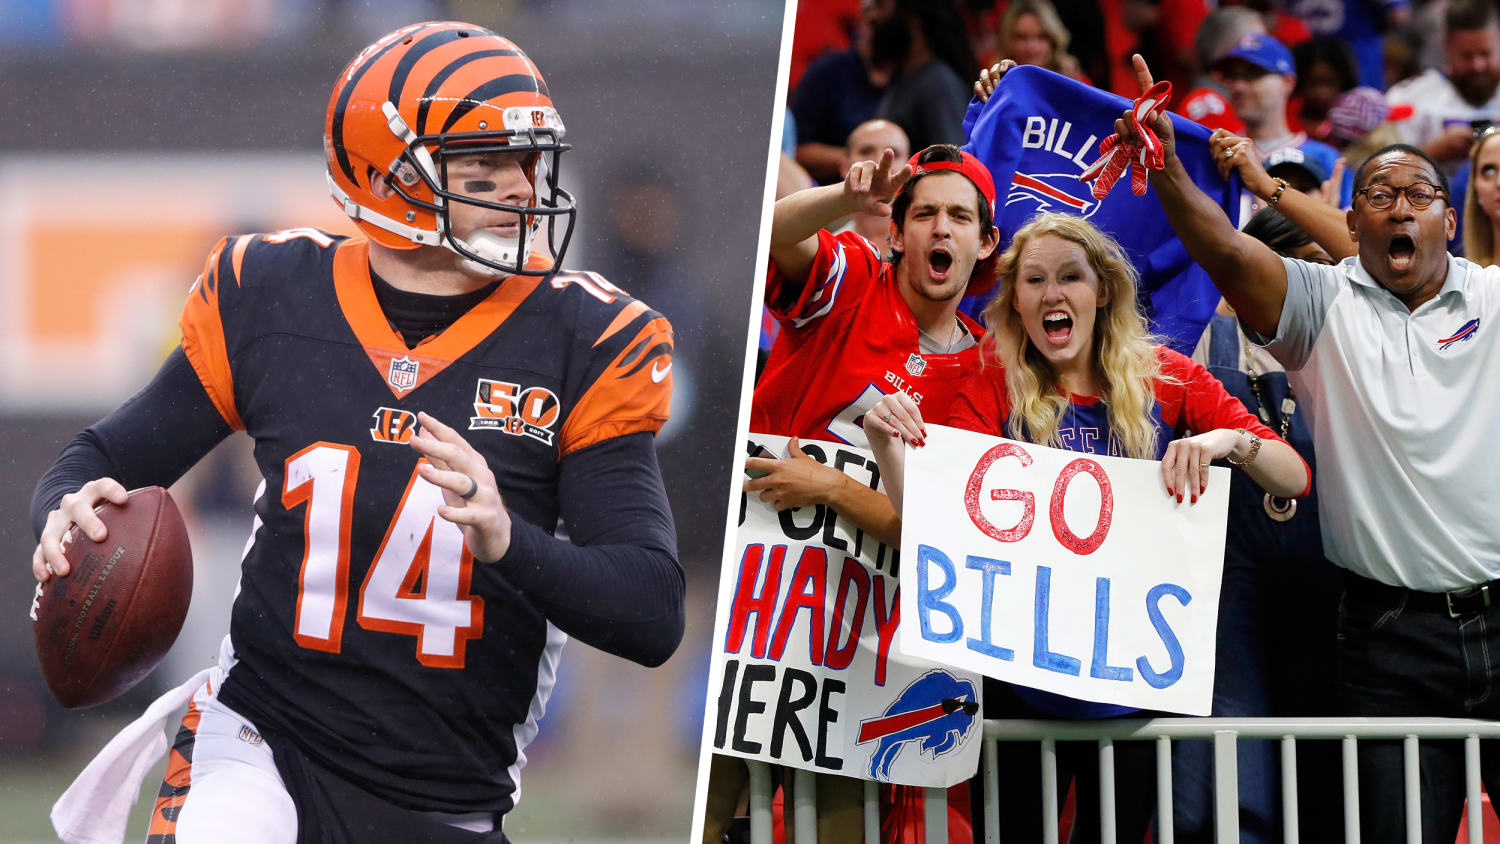 Bills fans donate $250K to Bengals QB Andy Dalton's charity after he saved  their season